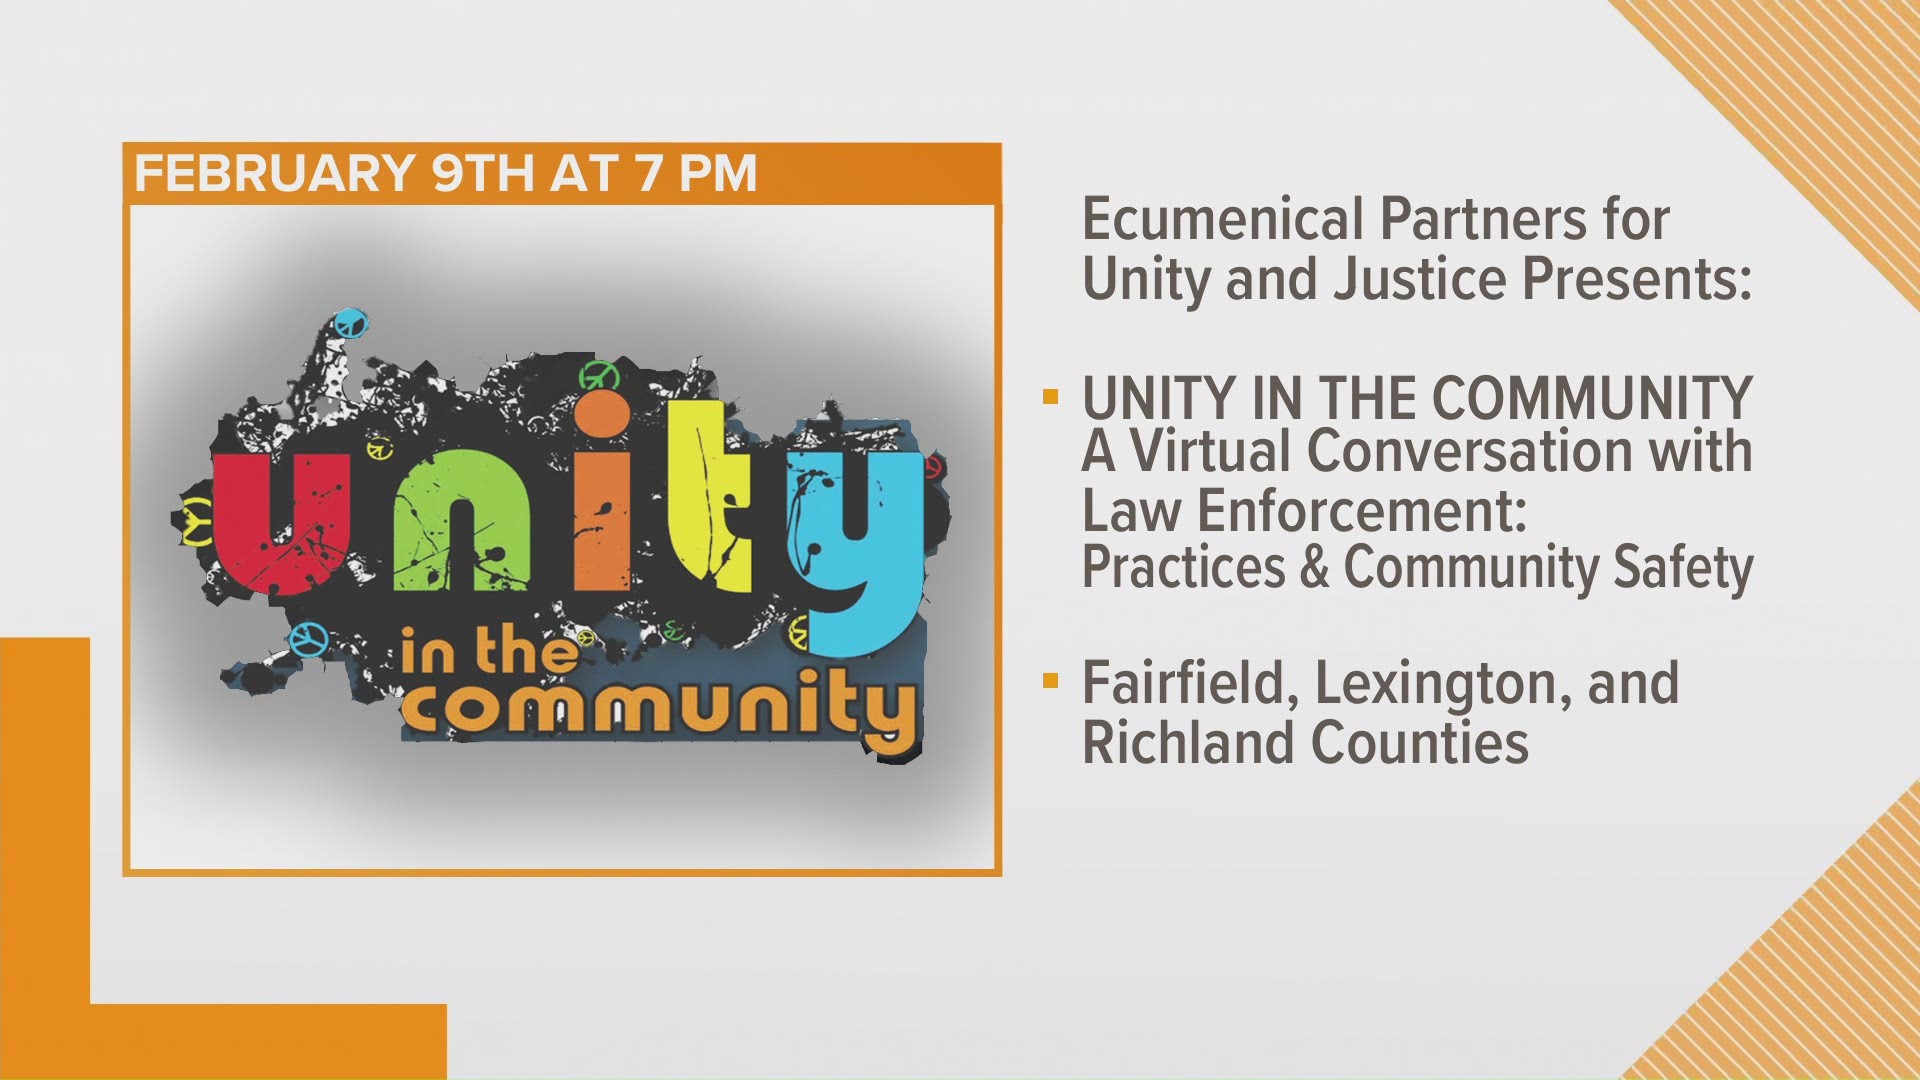 A group of local midlands churches are joining forces with law enforcement for a community conversation.